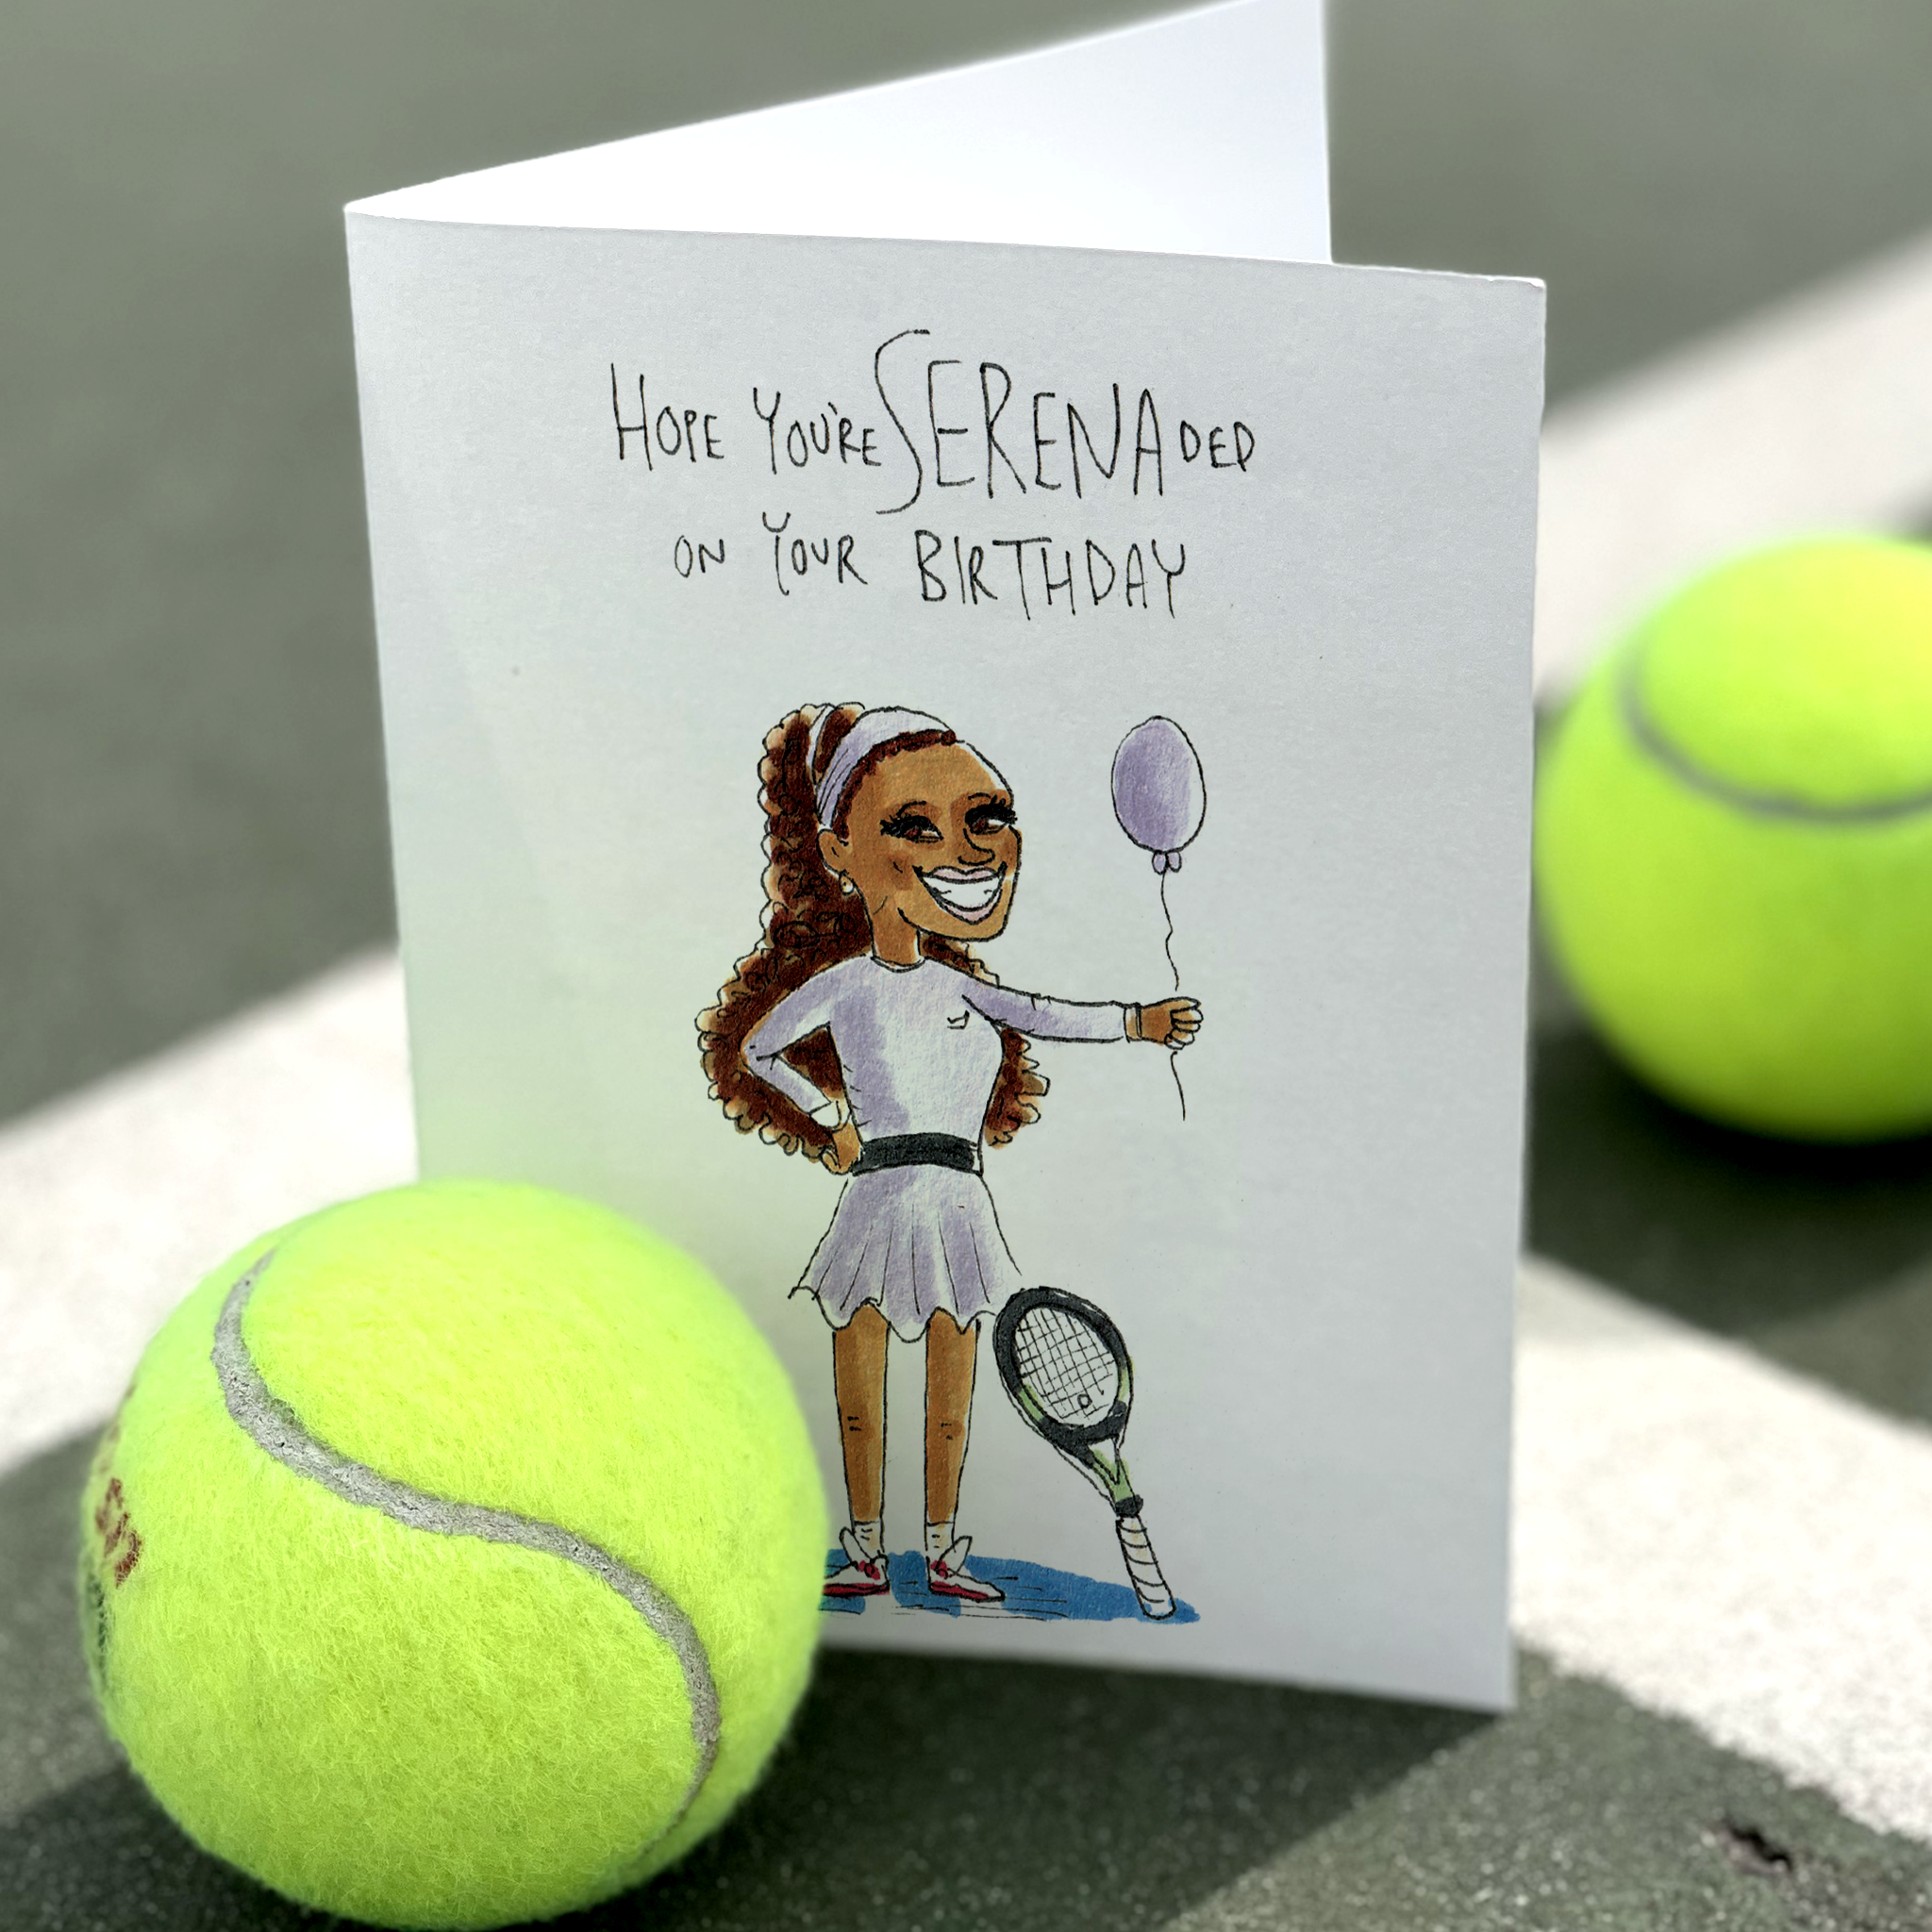 Hope You're Serenaded On Your Birthday - TENNIS FANS collection